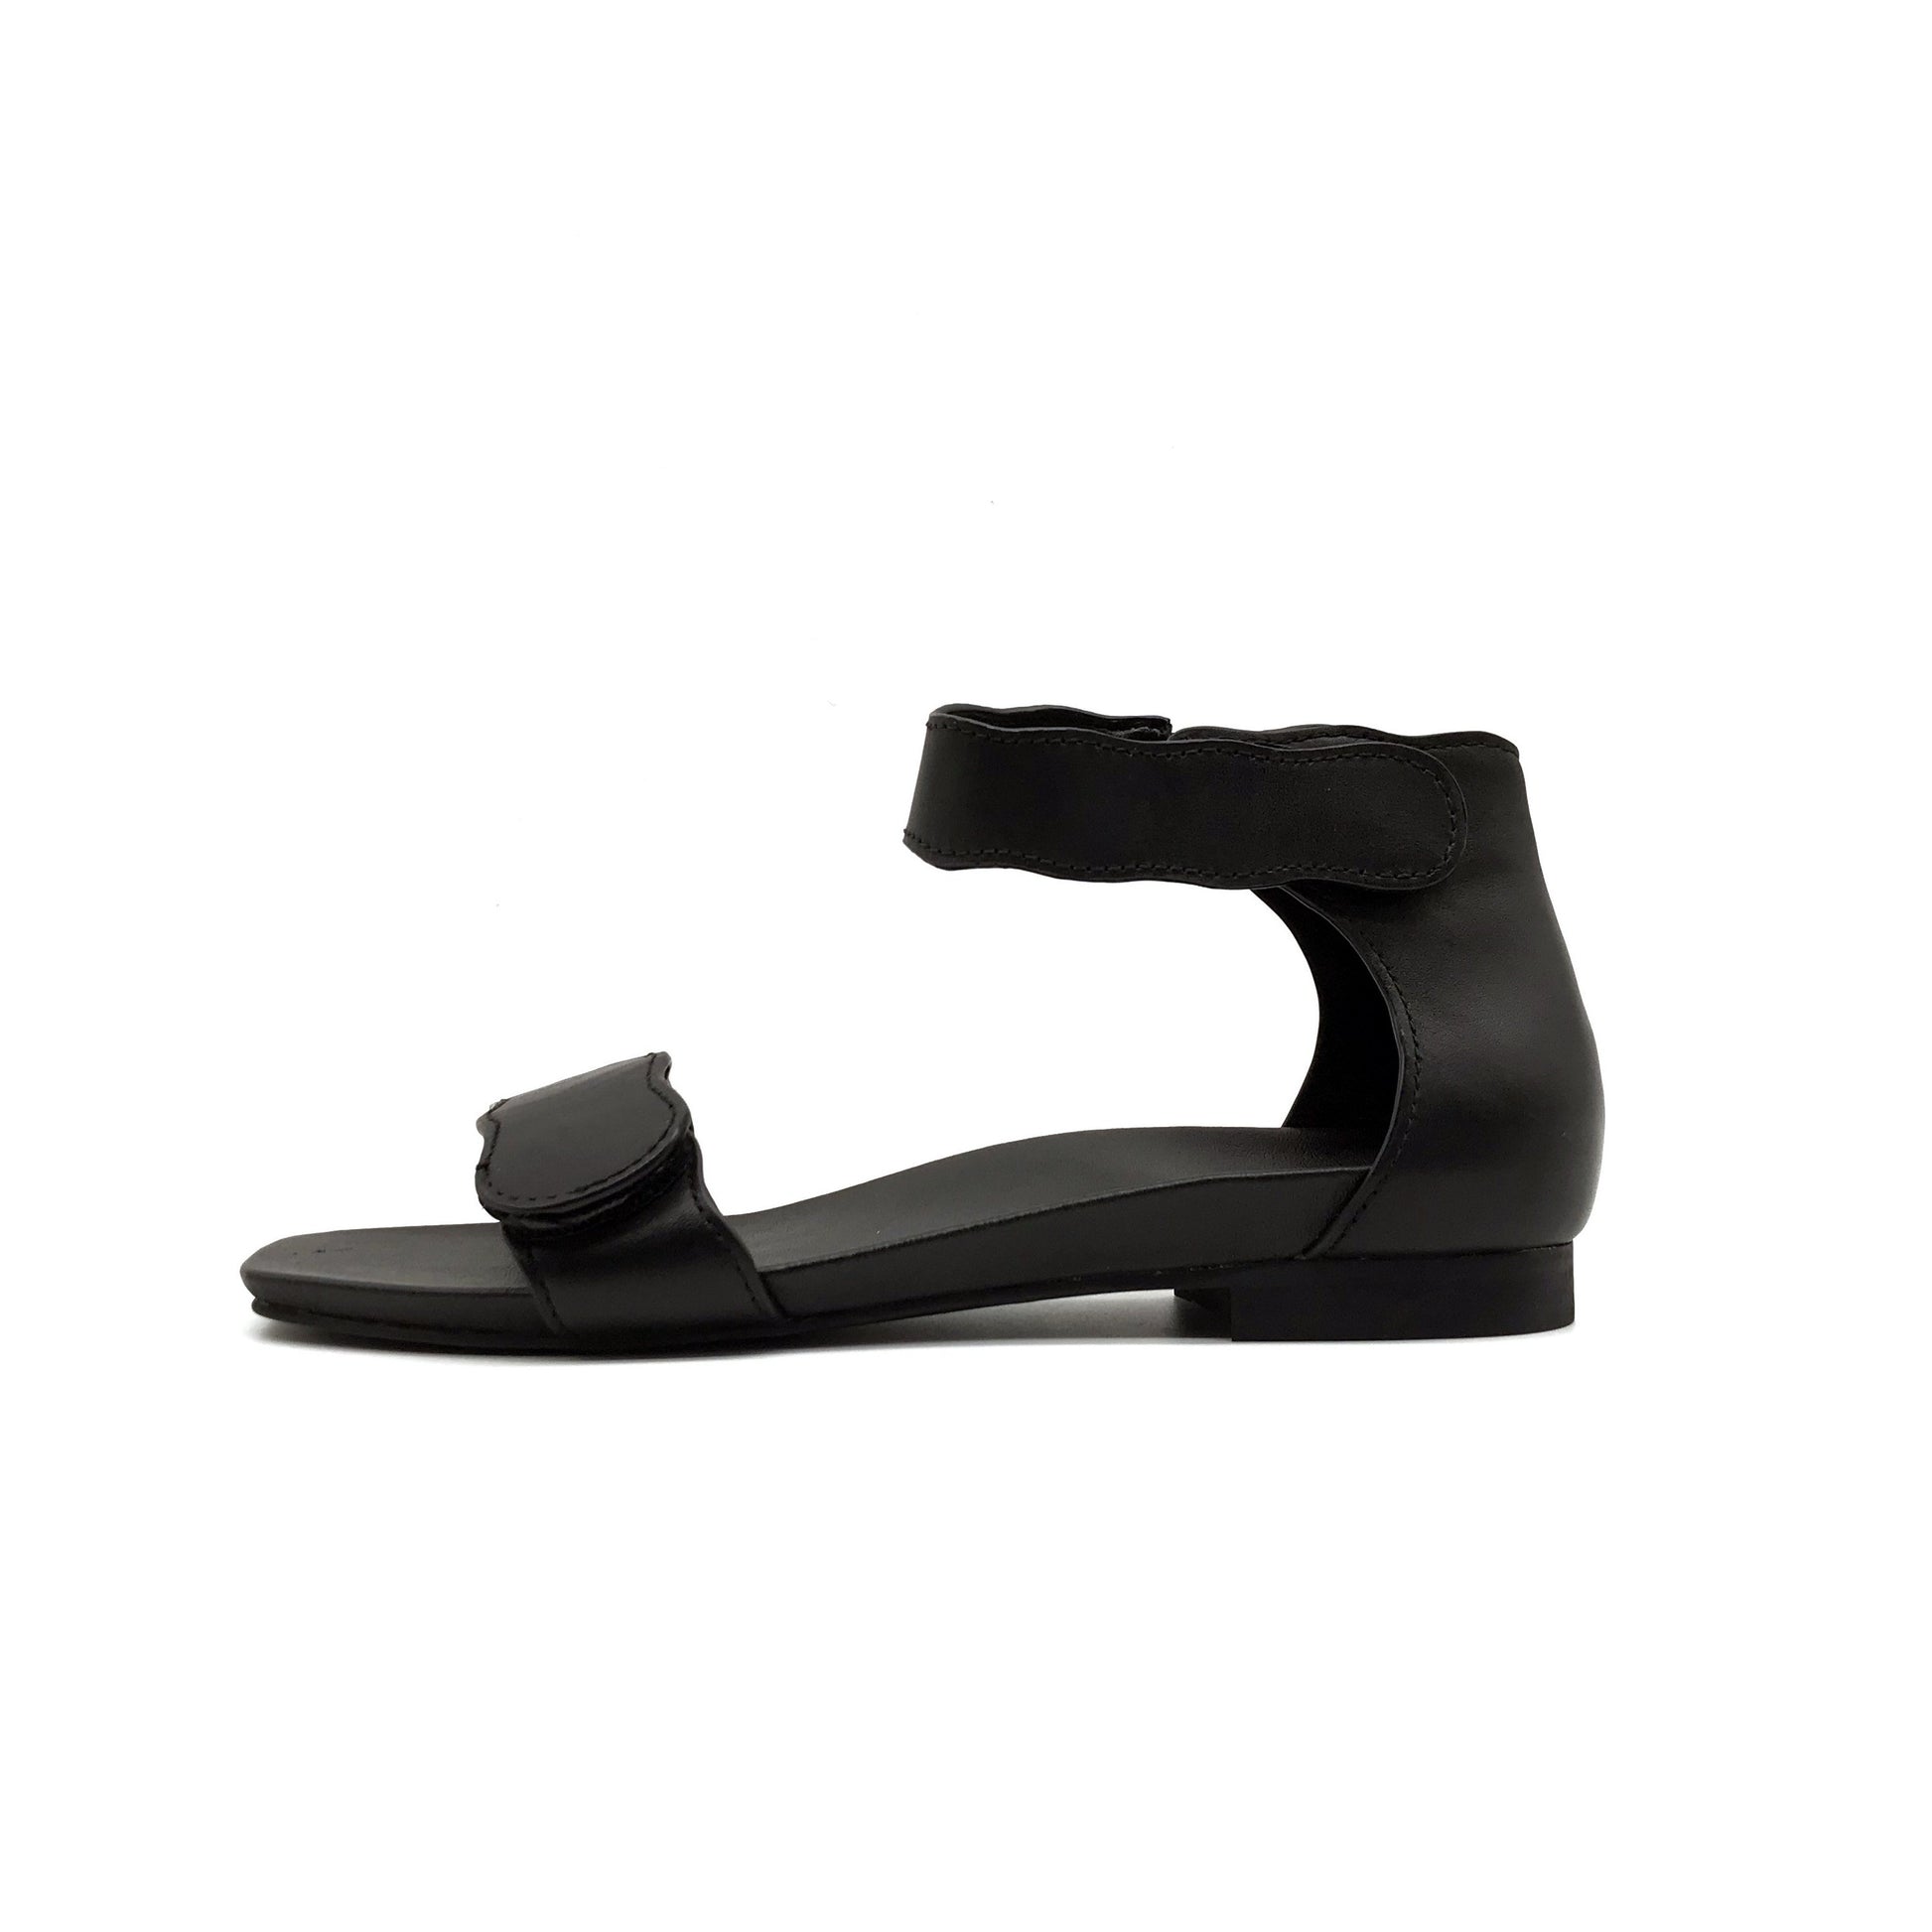 Light-weight Black leather sandals with adjustable strapes and arch support. Bio-contoured footbed, wide feet friendly